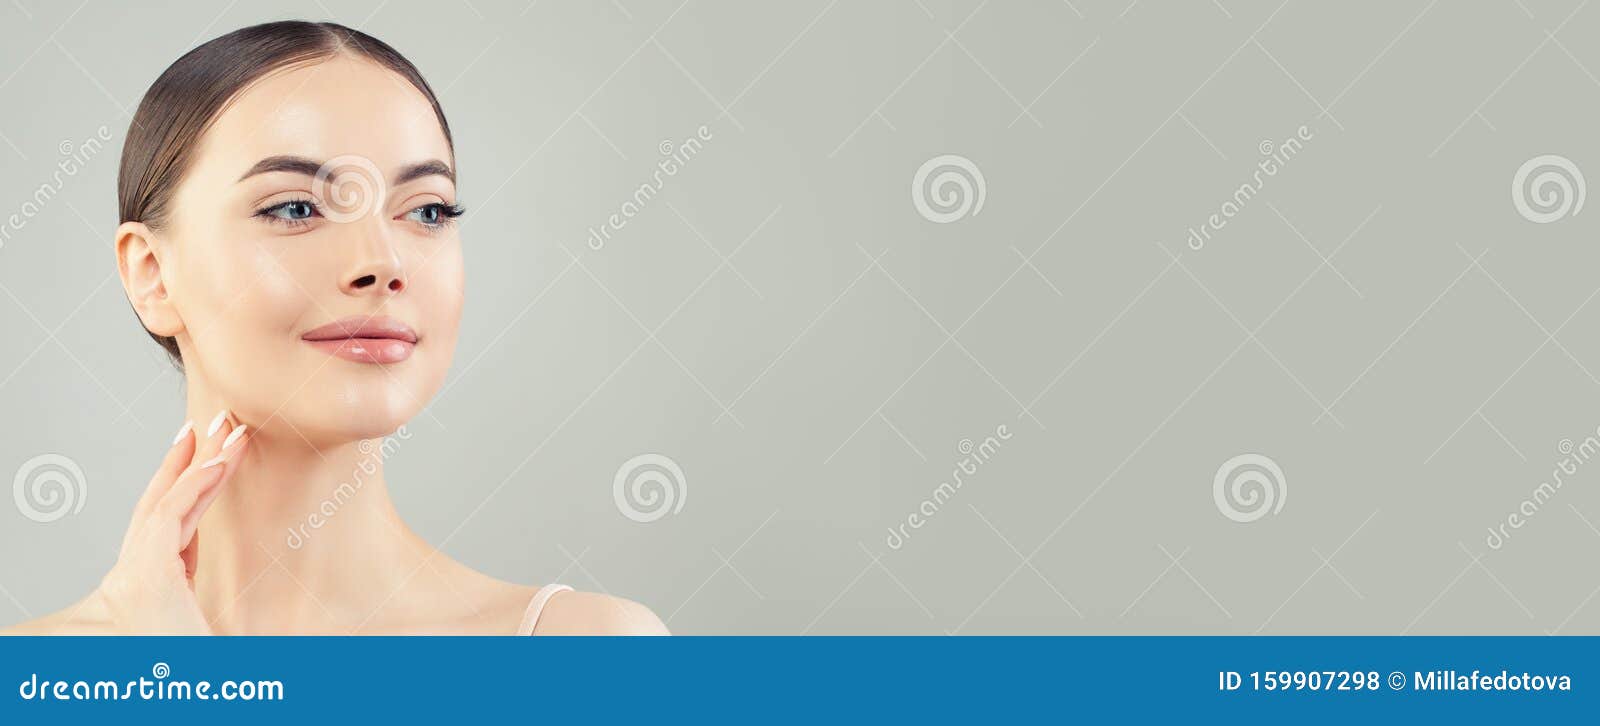 beautiful smiling woman with healthy skin, skin care concept